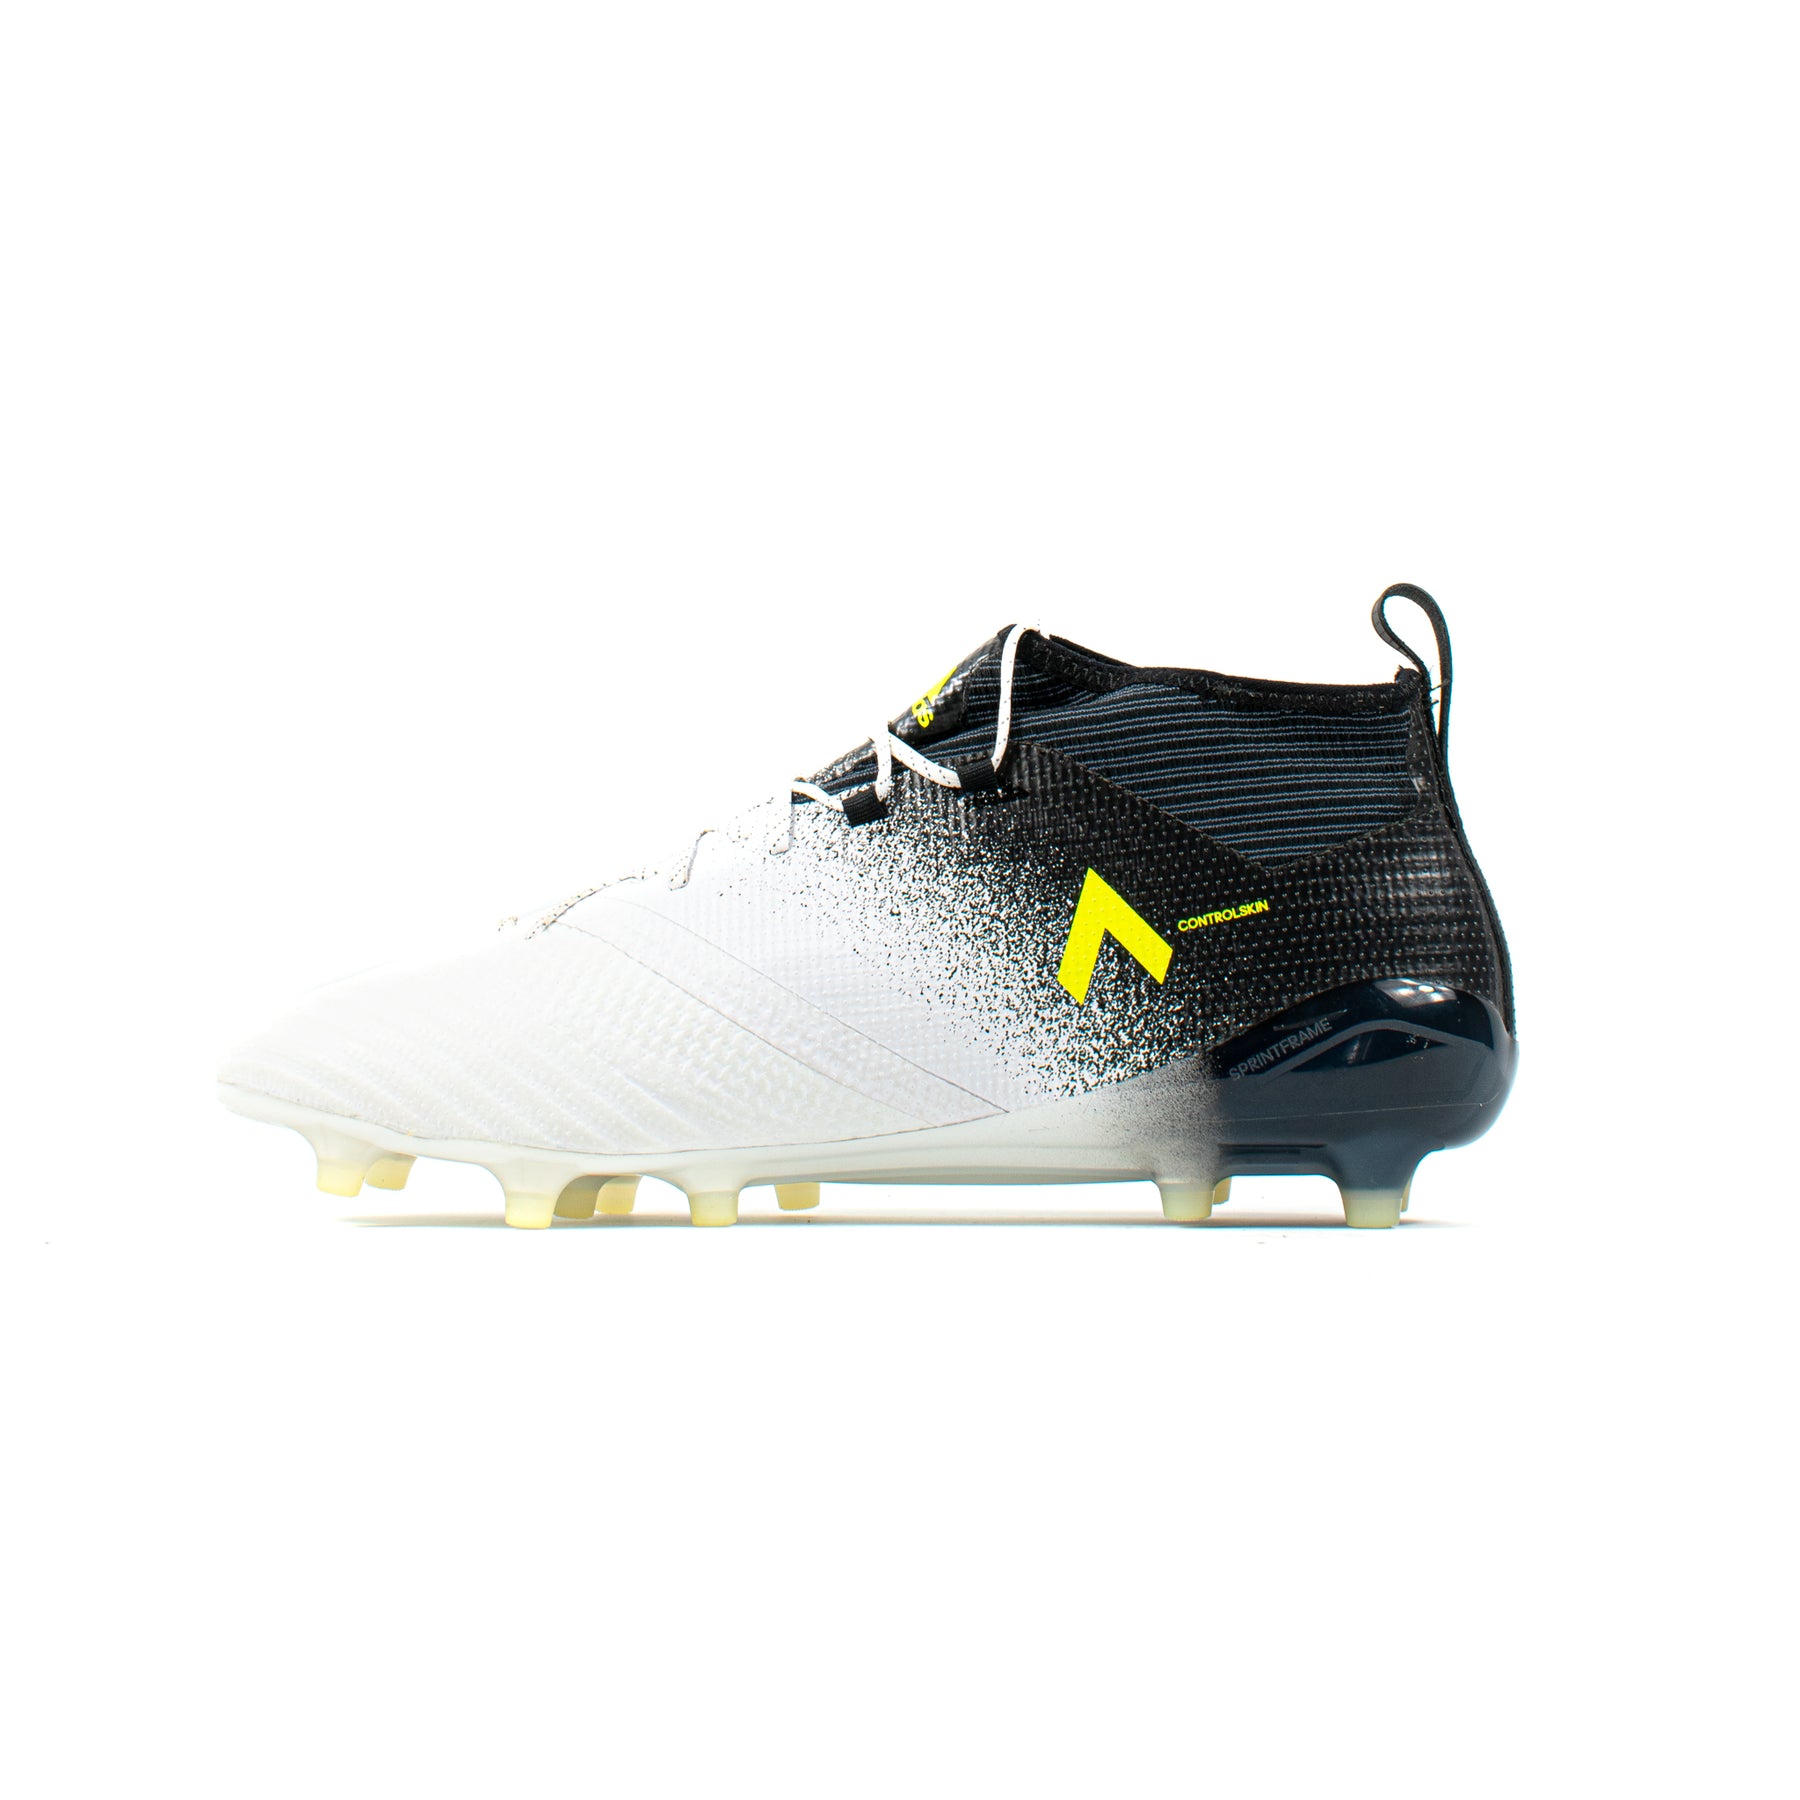 Adidas Ace White Black FG – Classic Soccer Cleats